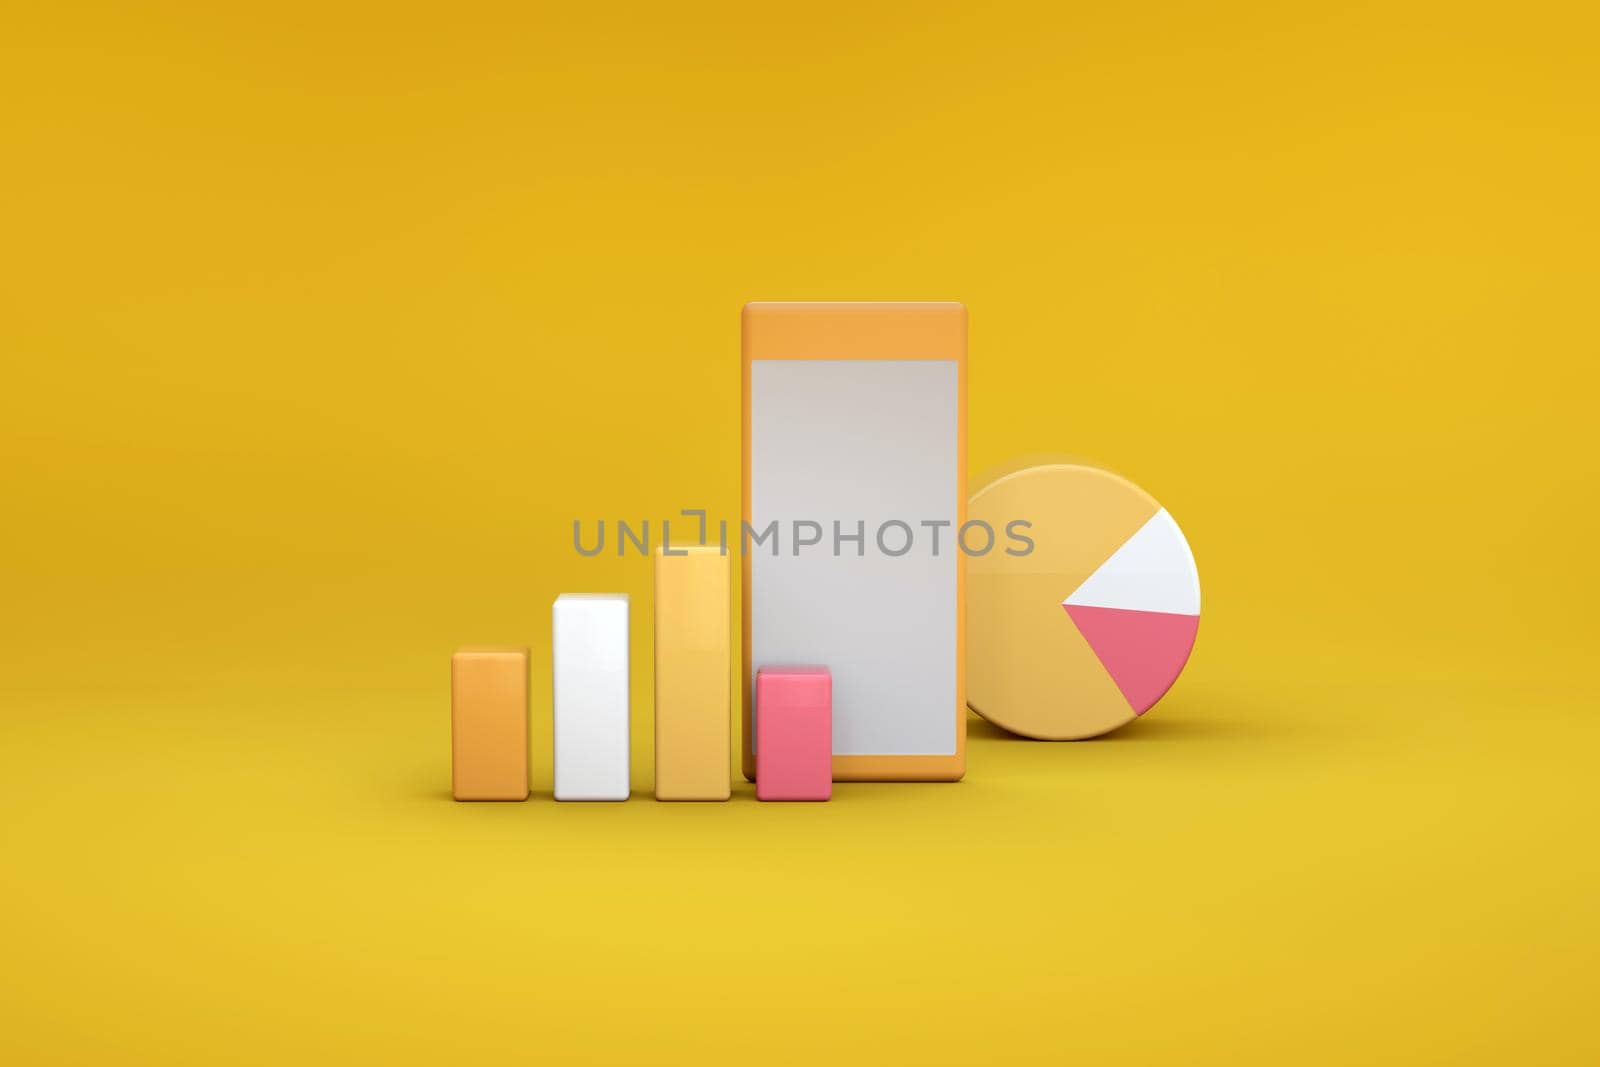 3D illustration of graphs and diagrams on a yellow isolated background. 3D illustration of objects and 3D orange icons on an isolated background. Statistics, charts, graphs, reports. by Camera_motorin